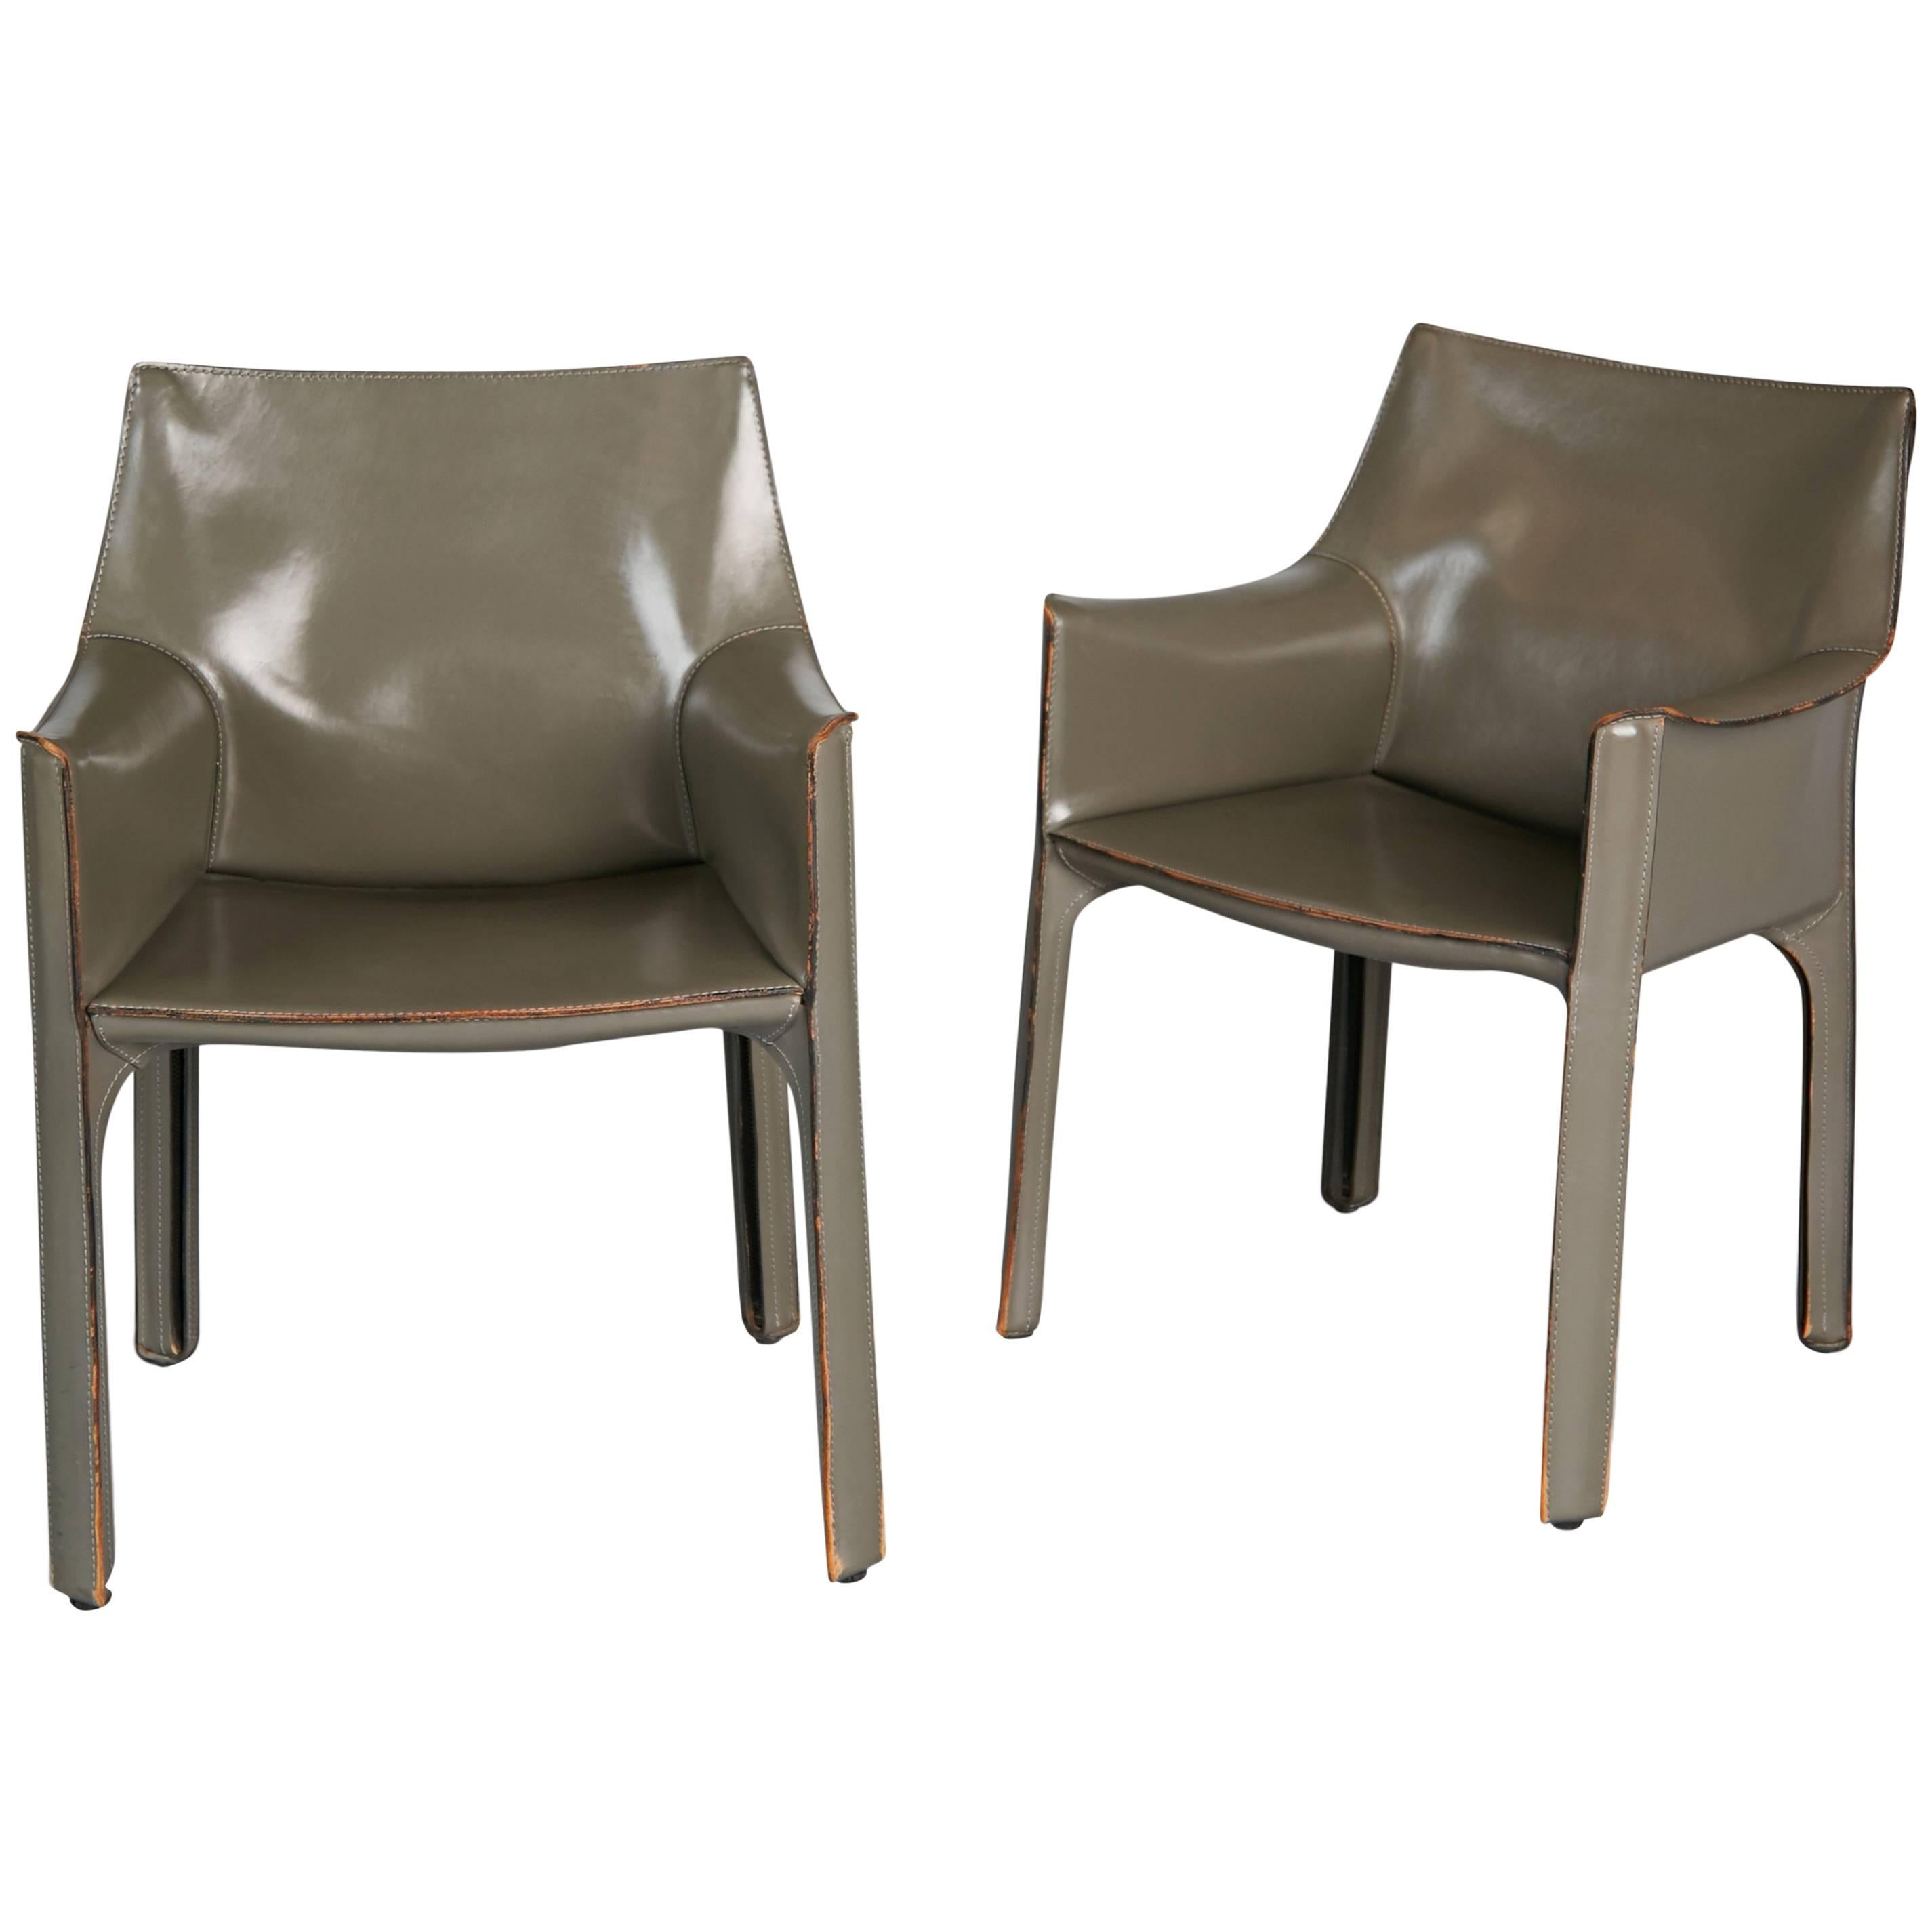 Mario Bellini Pair of Grey Leather Cab Armchairs for Cassina, Italy